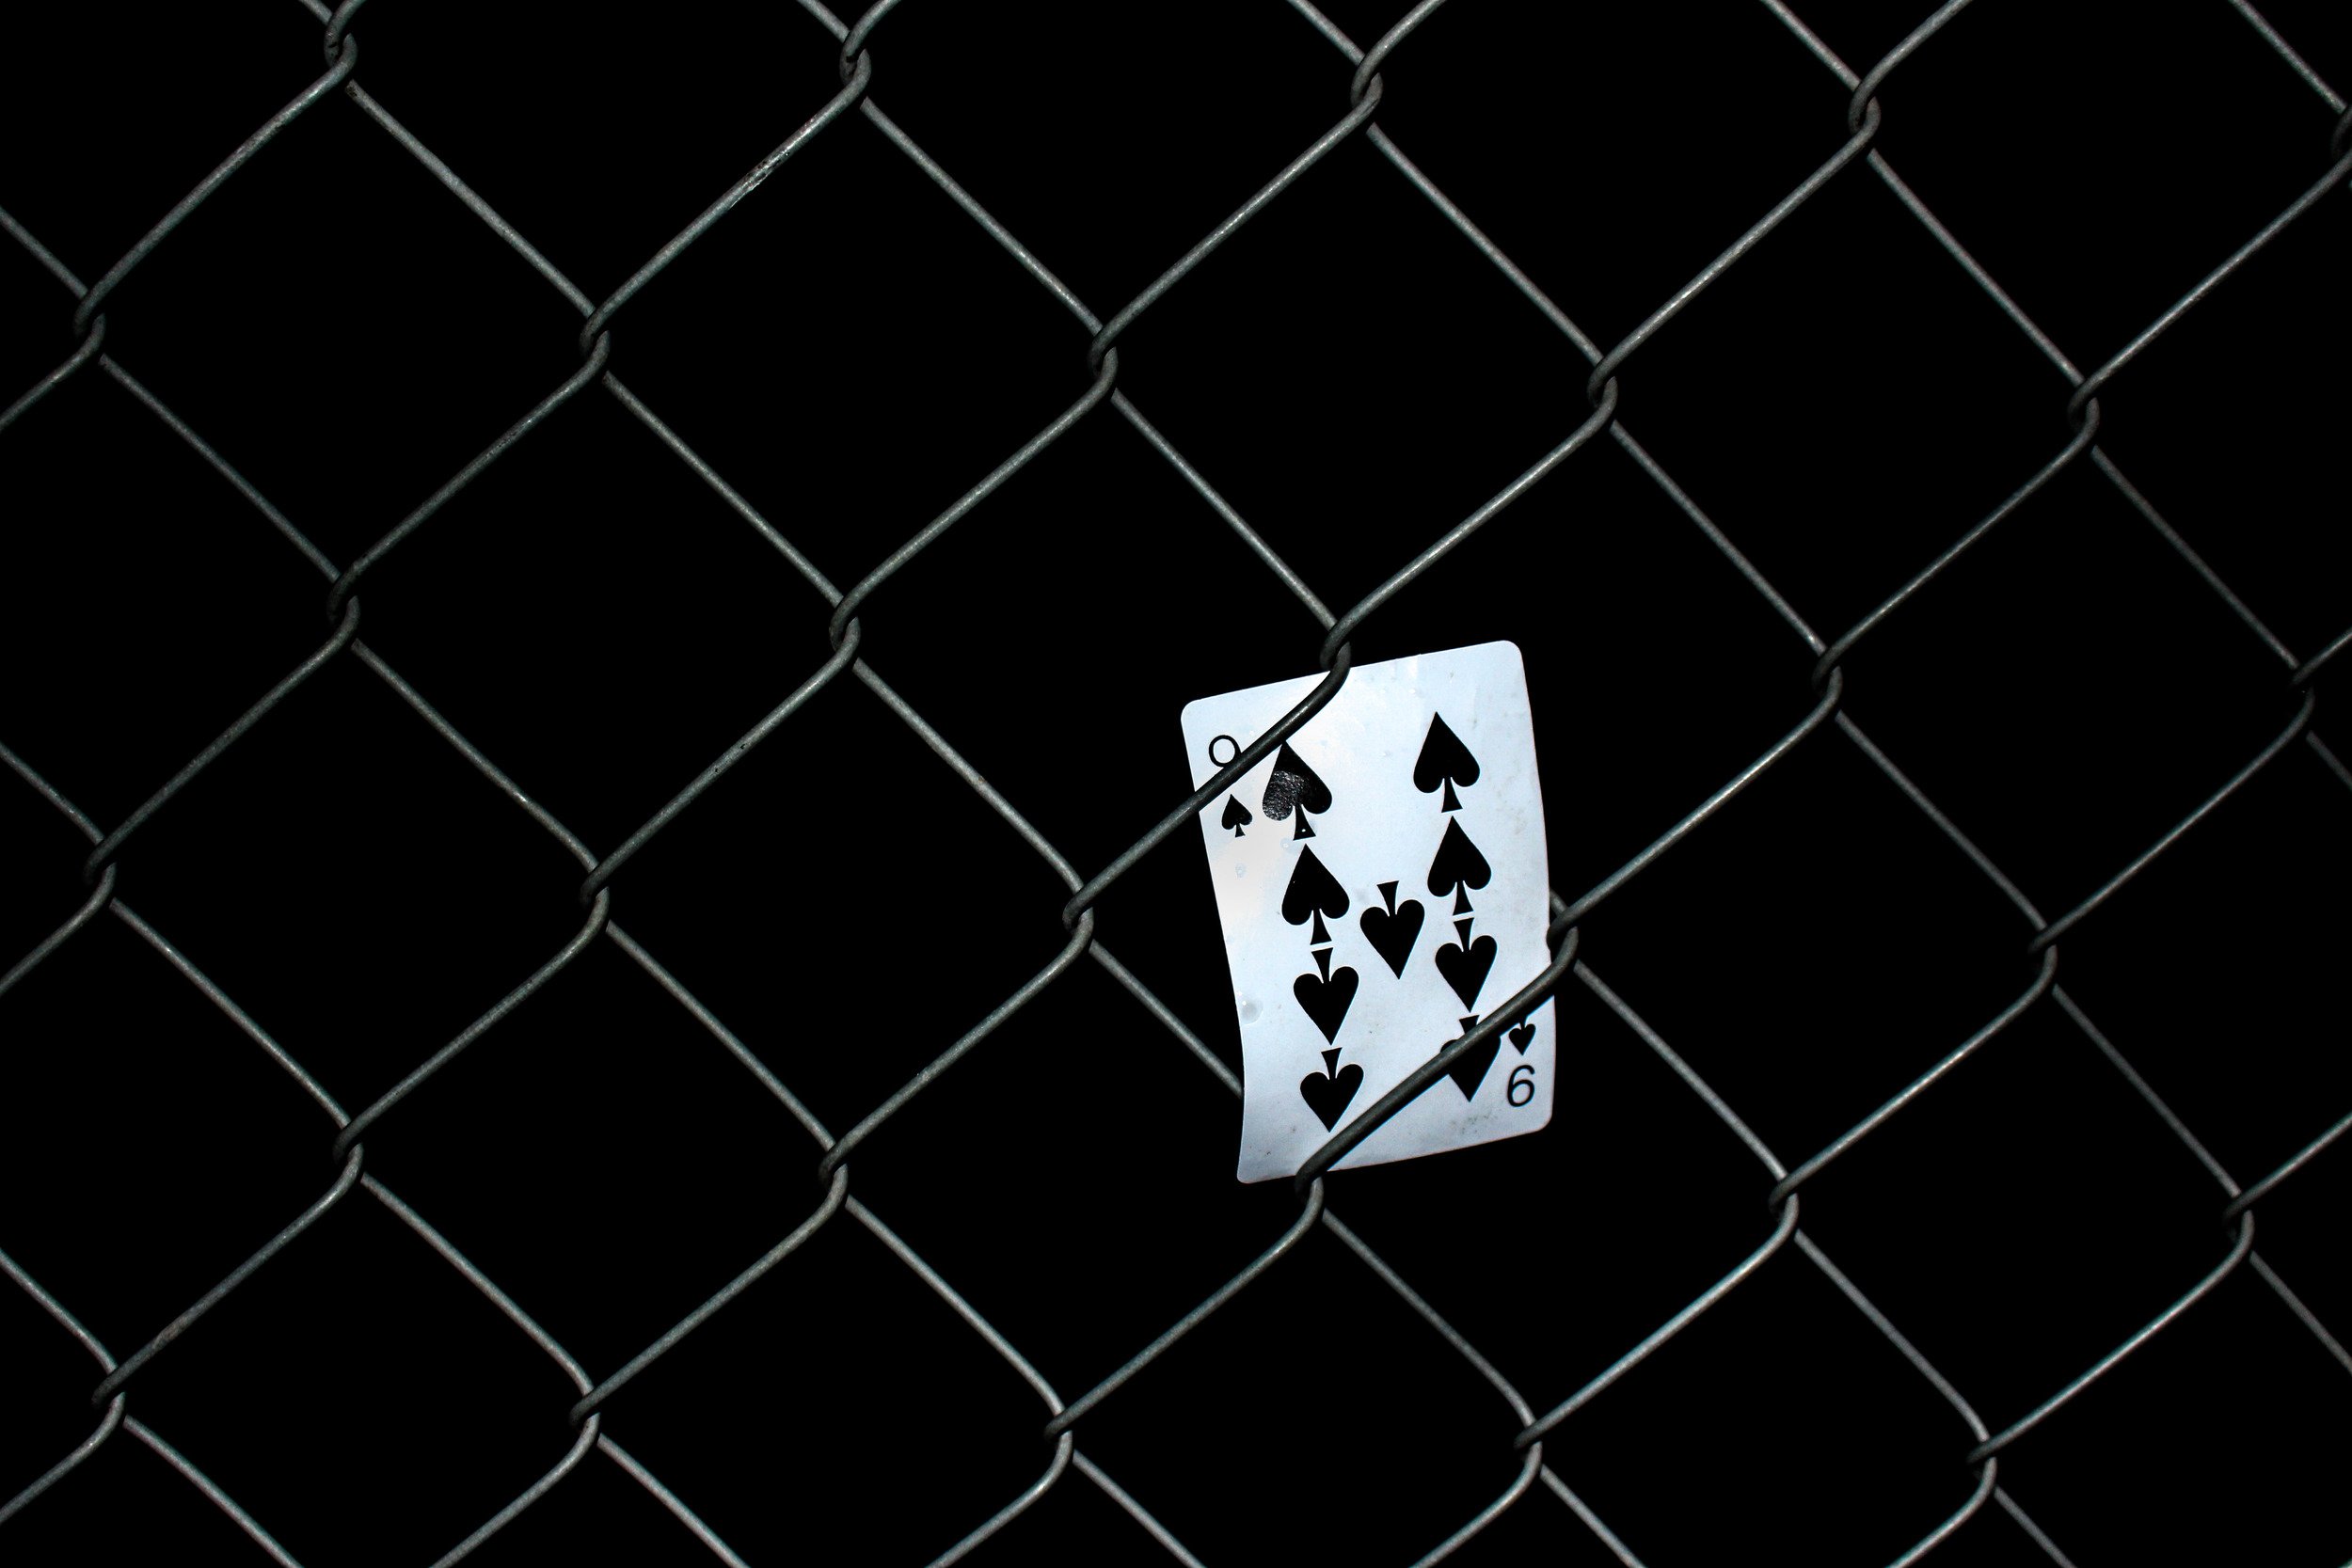 cpr blog post photo - 9 of spades card stuck in fence.jpeg